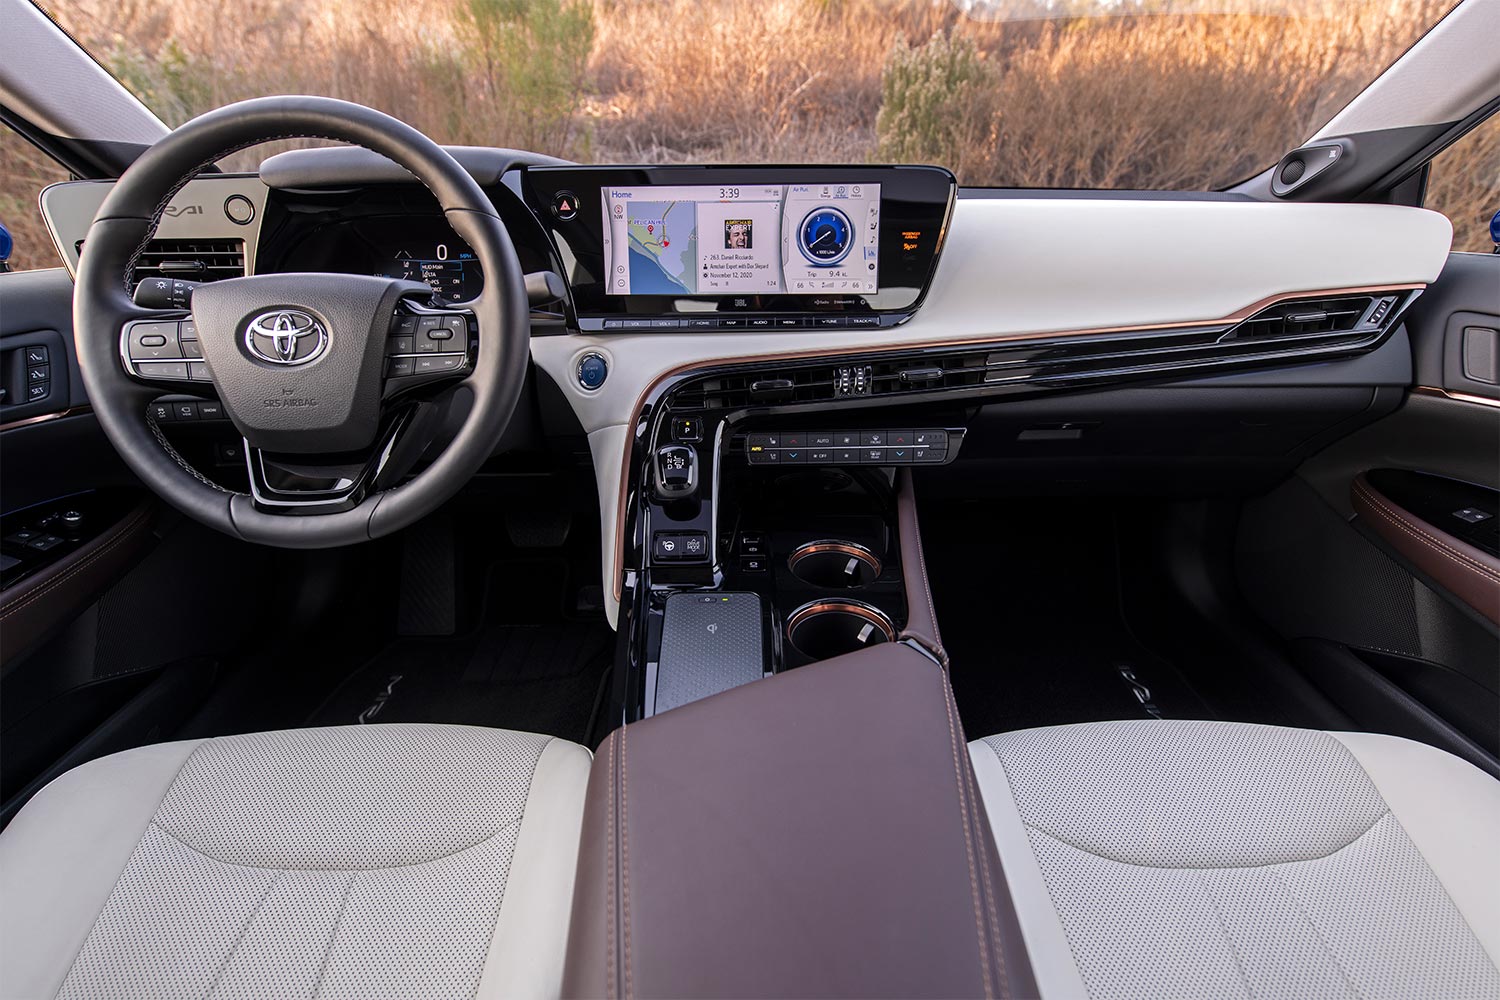 The interior of the Toyota Mirai, a hydrogen fuel cell vehicle we reviewed